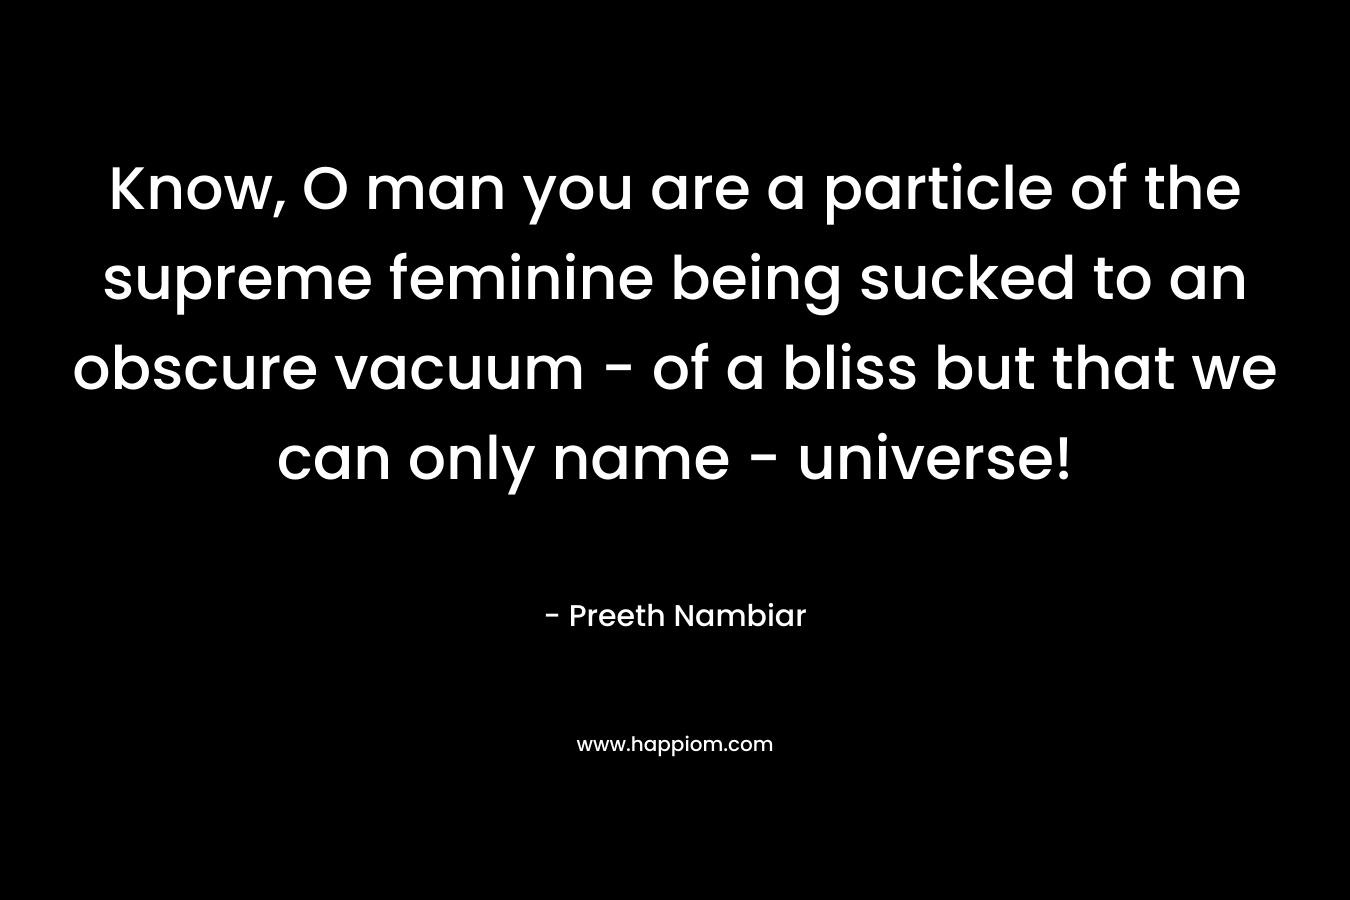 Know, O man you are a particle of the supreme feminine being sucked to an obscure vacuum – of a bliss but that we can only name – universe! – Preeth Nambiar